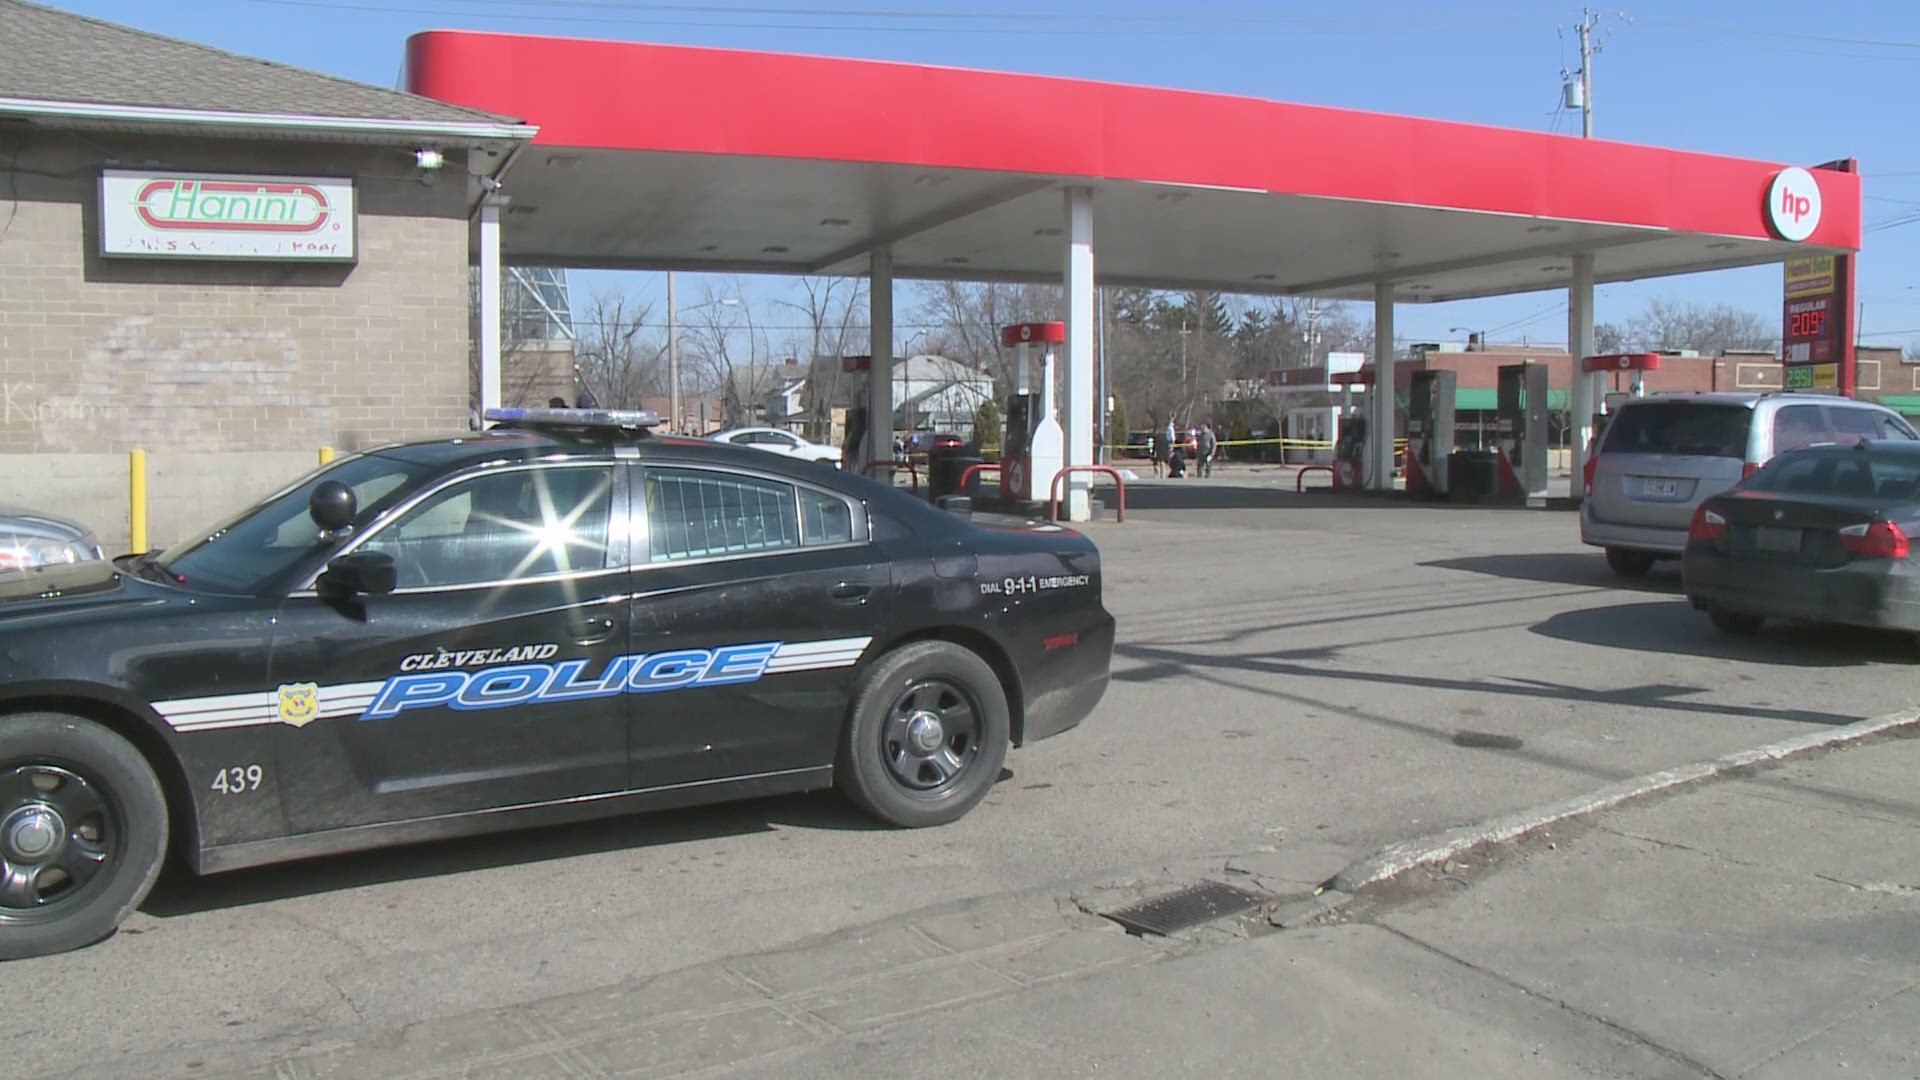 A 22-year-old man is dead and a 25-year-old wounded following a shooting outside of a gas station. The victim who was wounded was taken to University Hospitals.